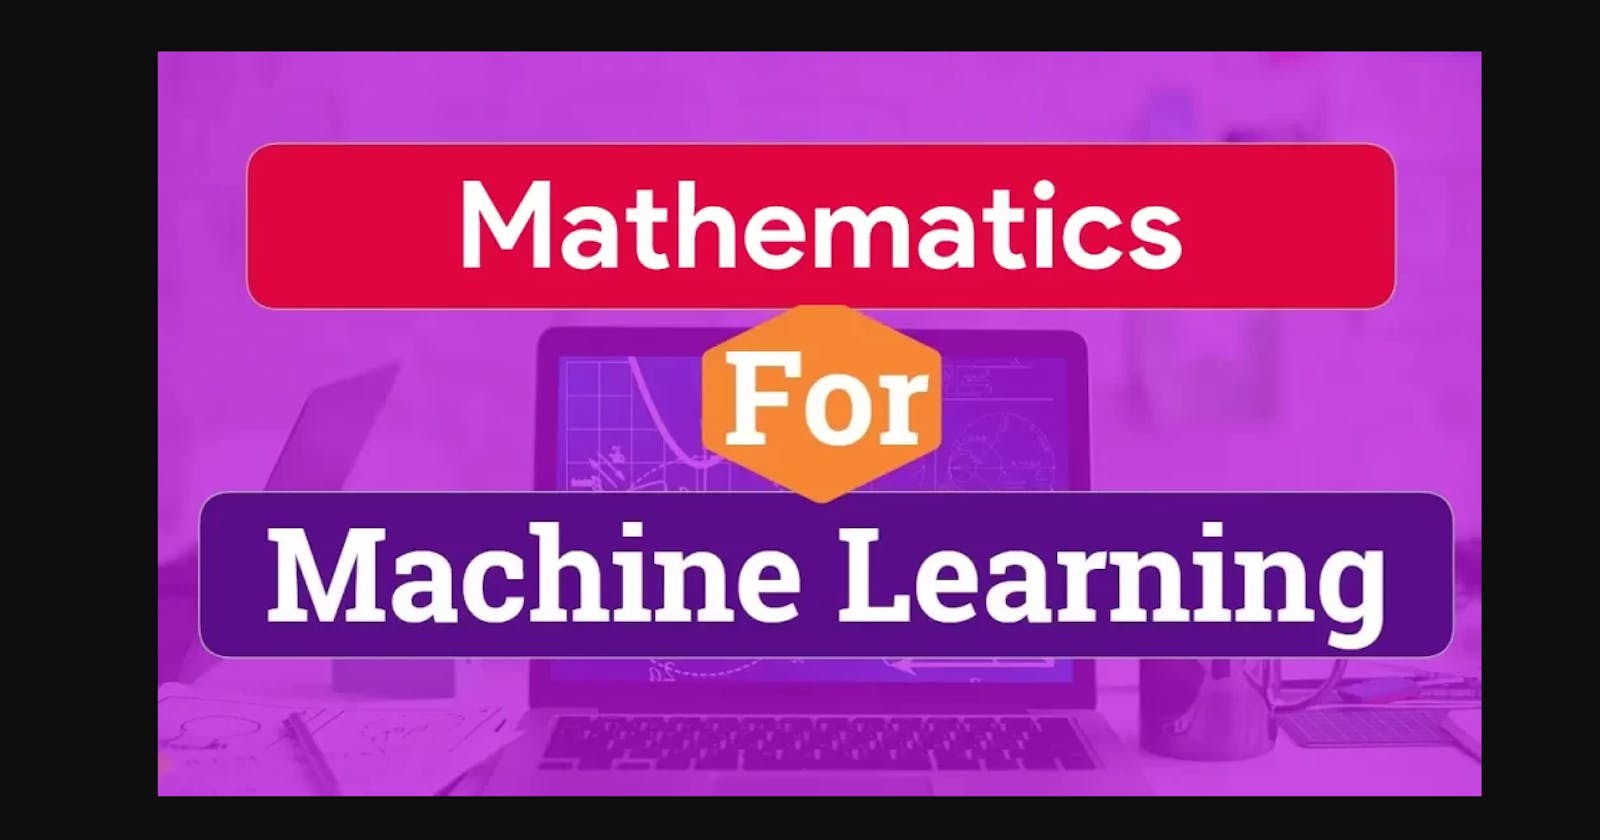 Mathematics for Machine Learning: All You Need to Know